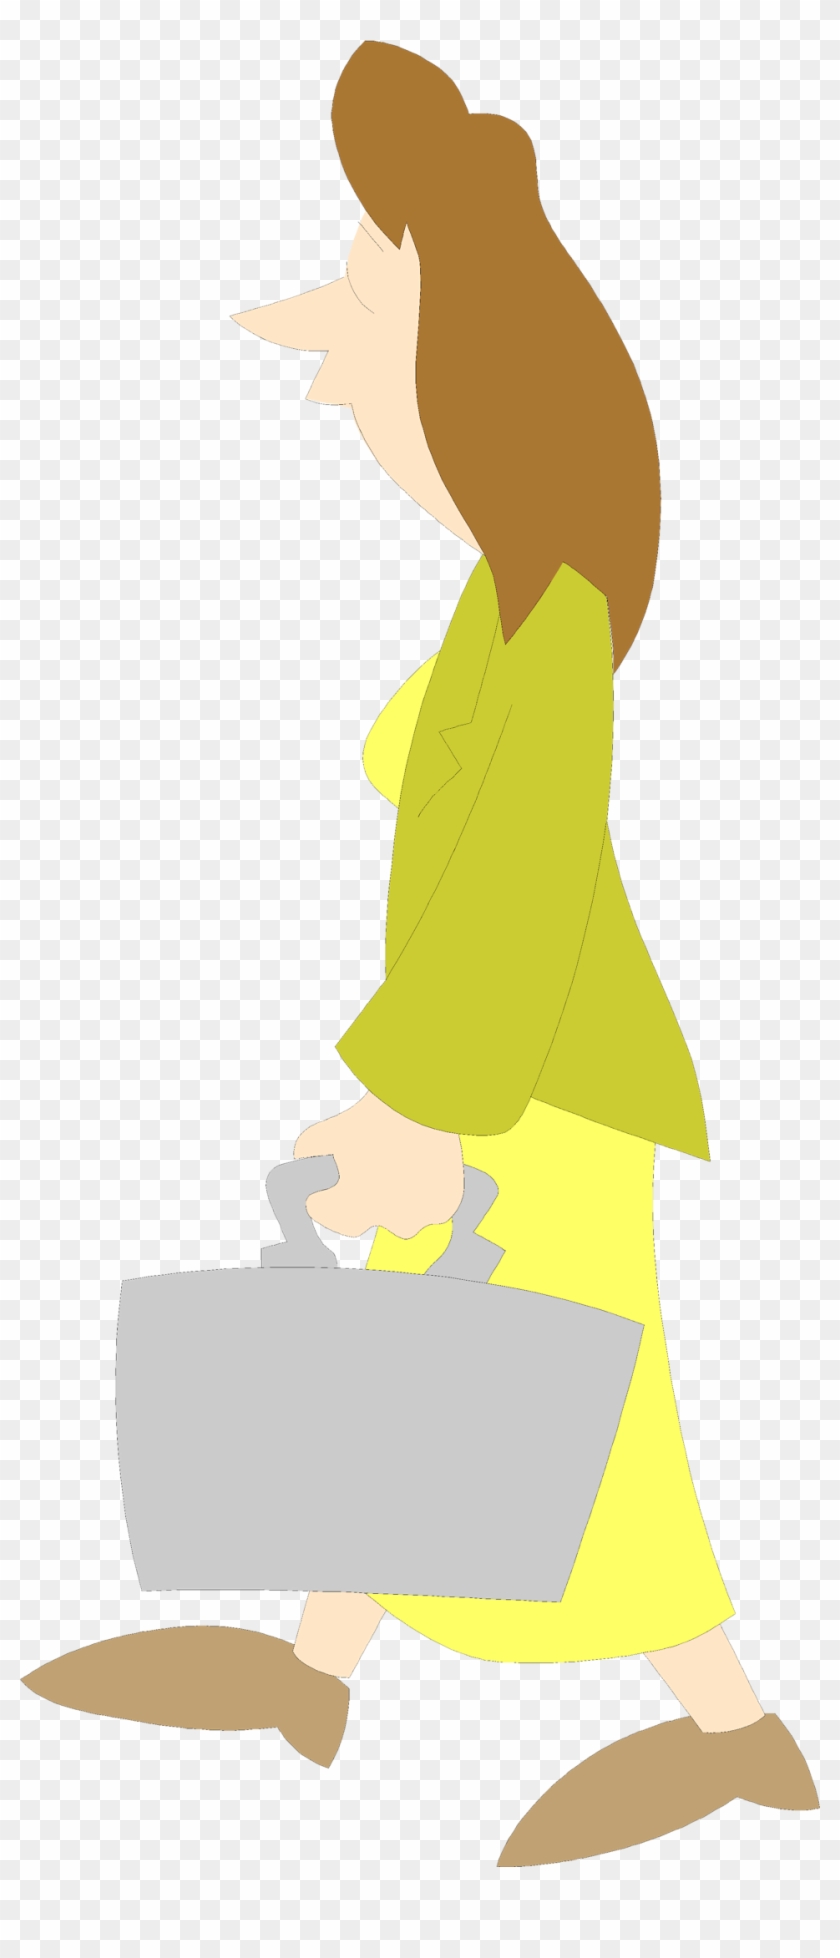 Illustration Of A Business Woman Carrying A Briefcase - Illustration Clipart